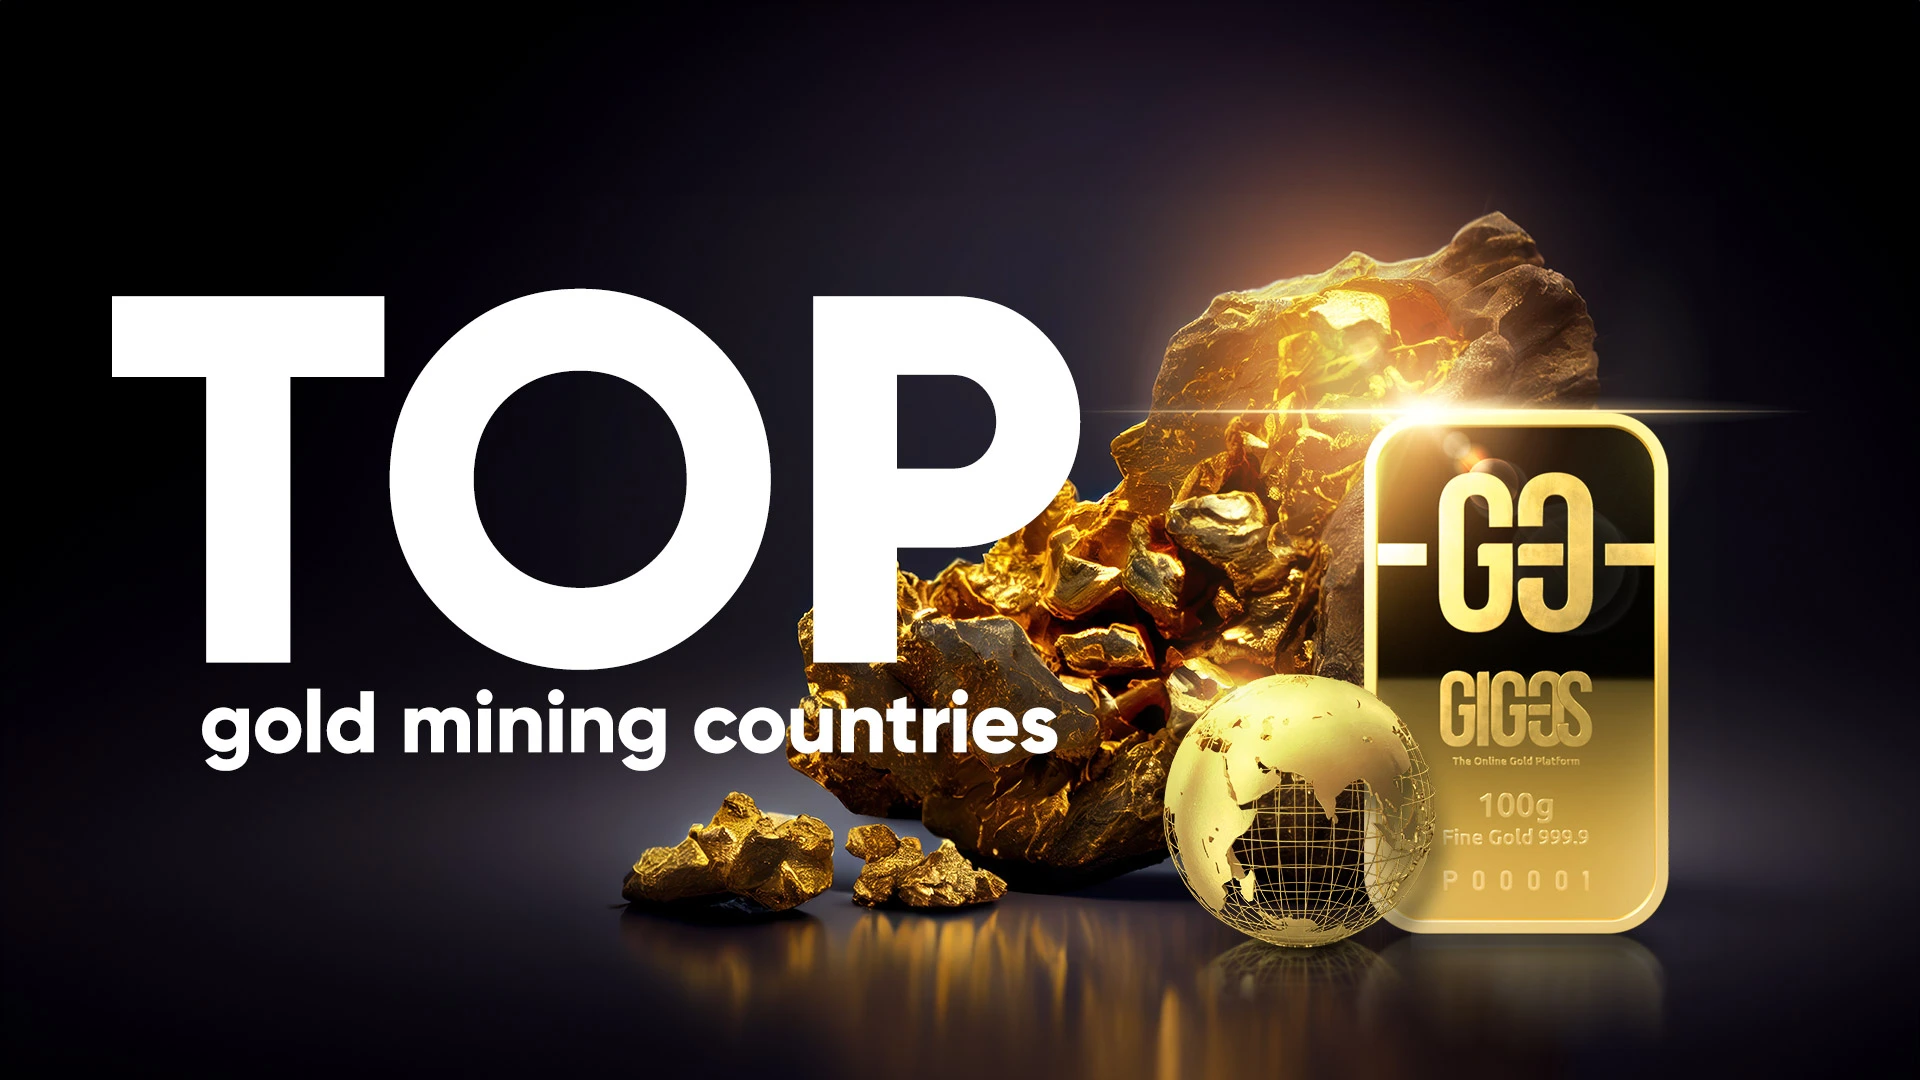 [VIDEO] TOP gold mining countries